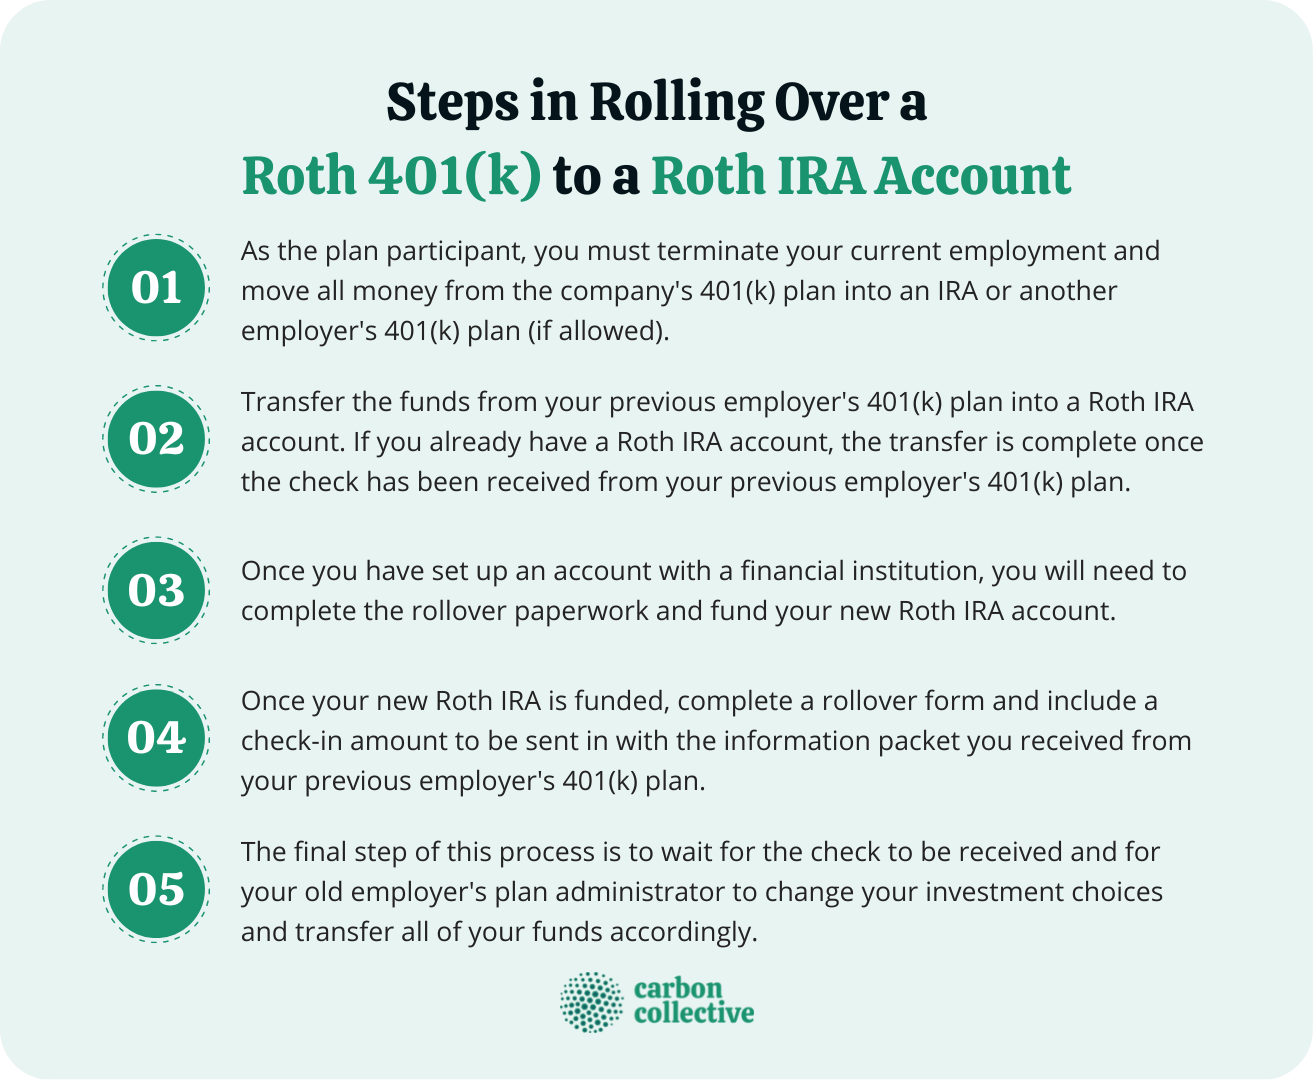 Roth 401(k) to Roth IRA Rollover How to Do It & Things to Consider